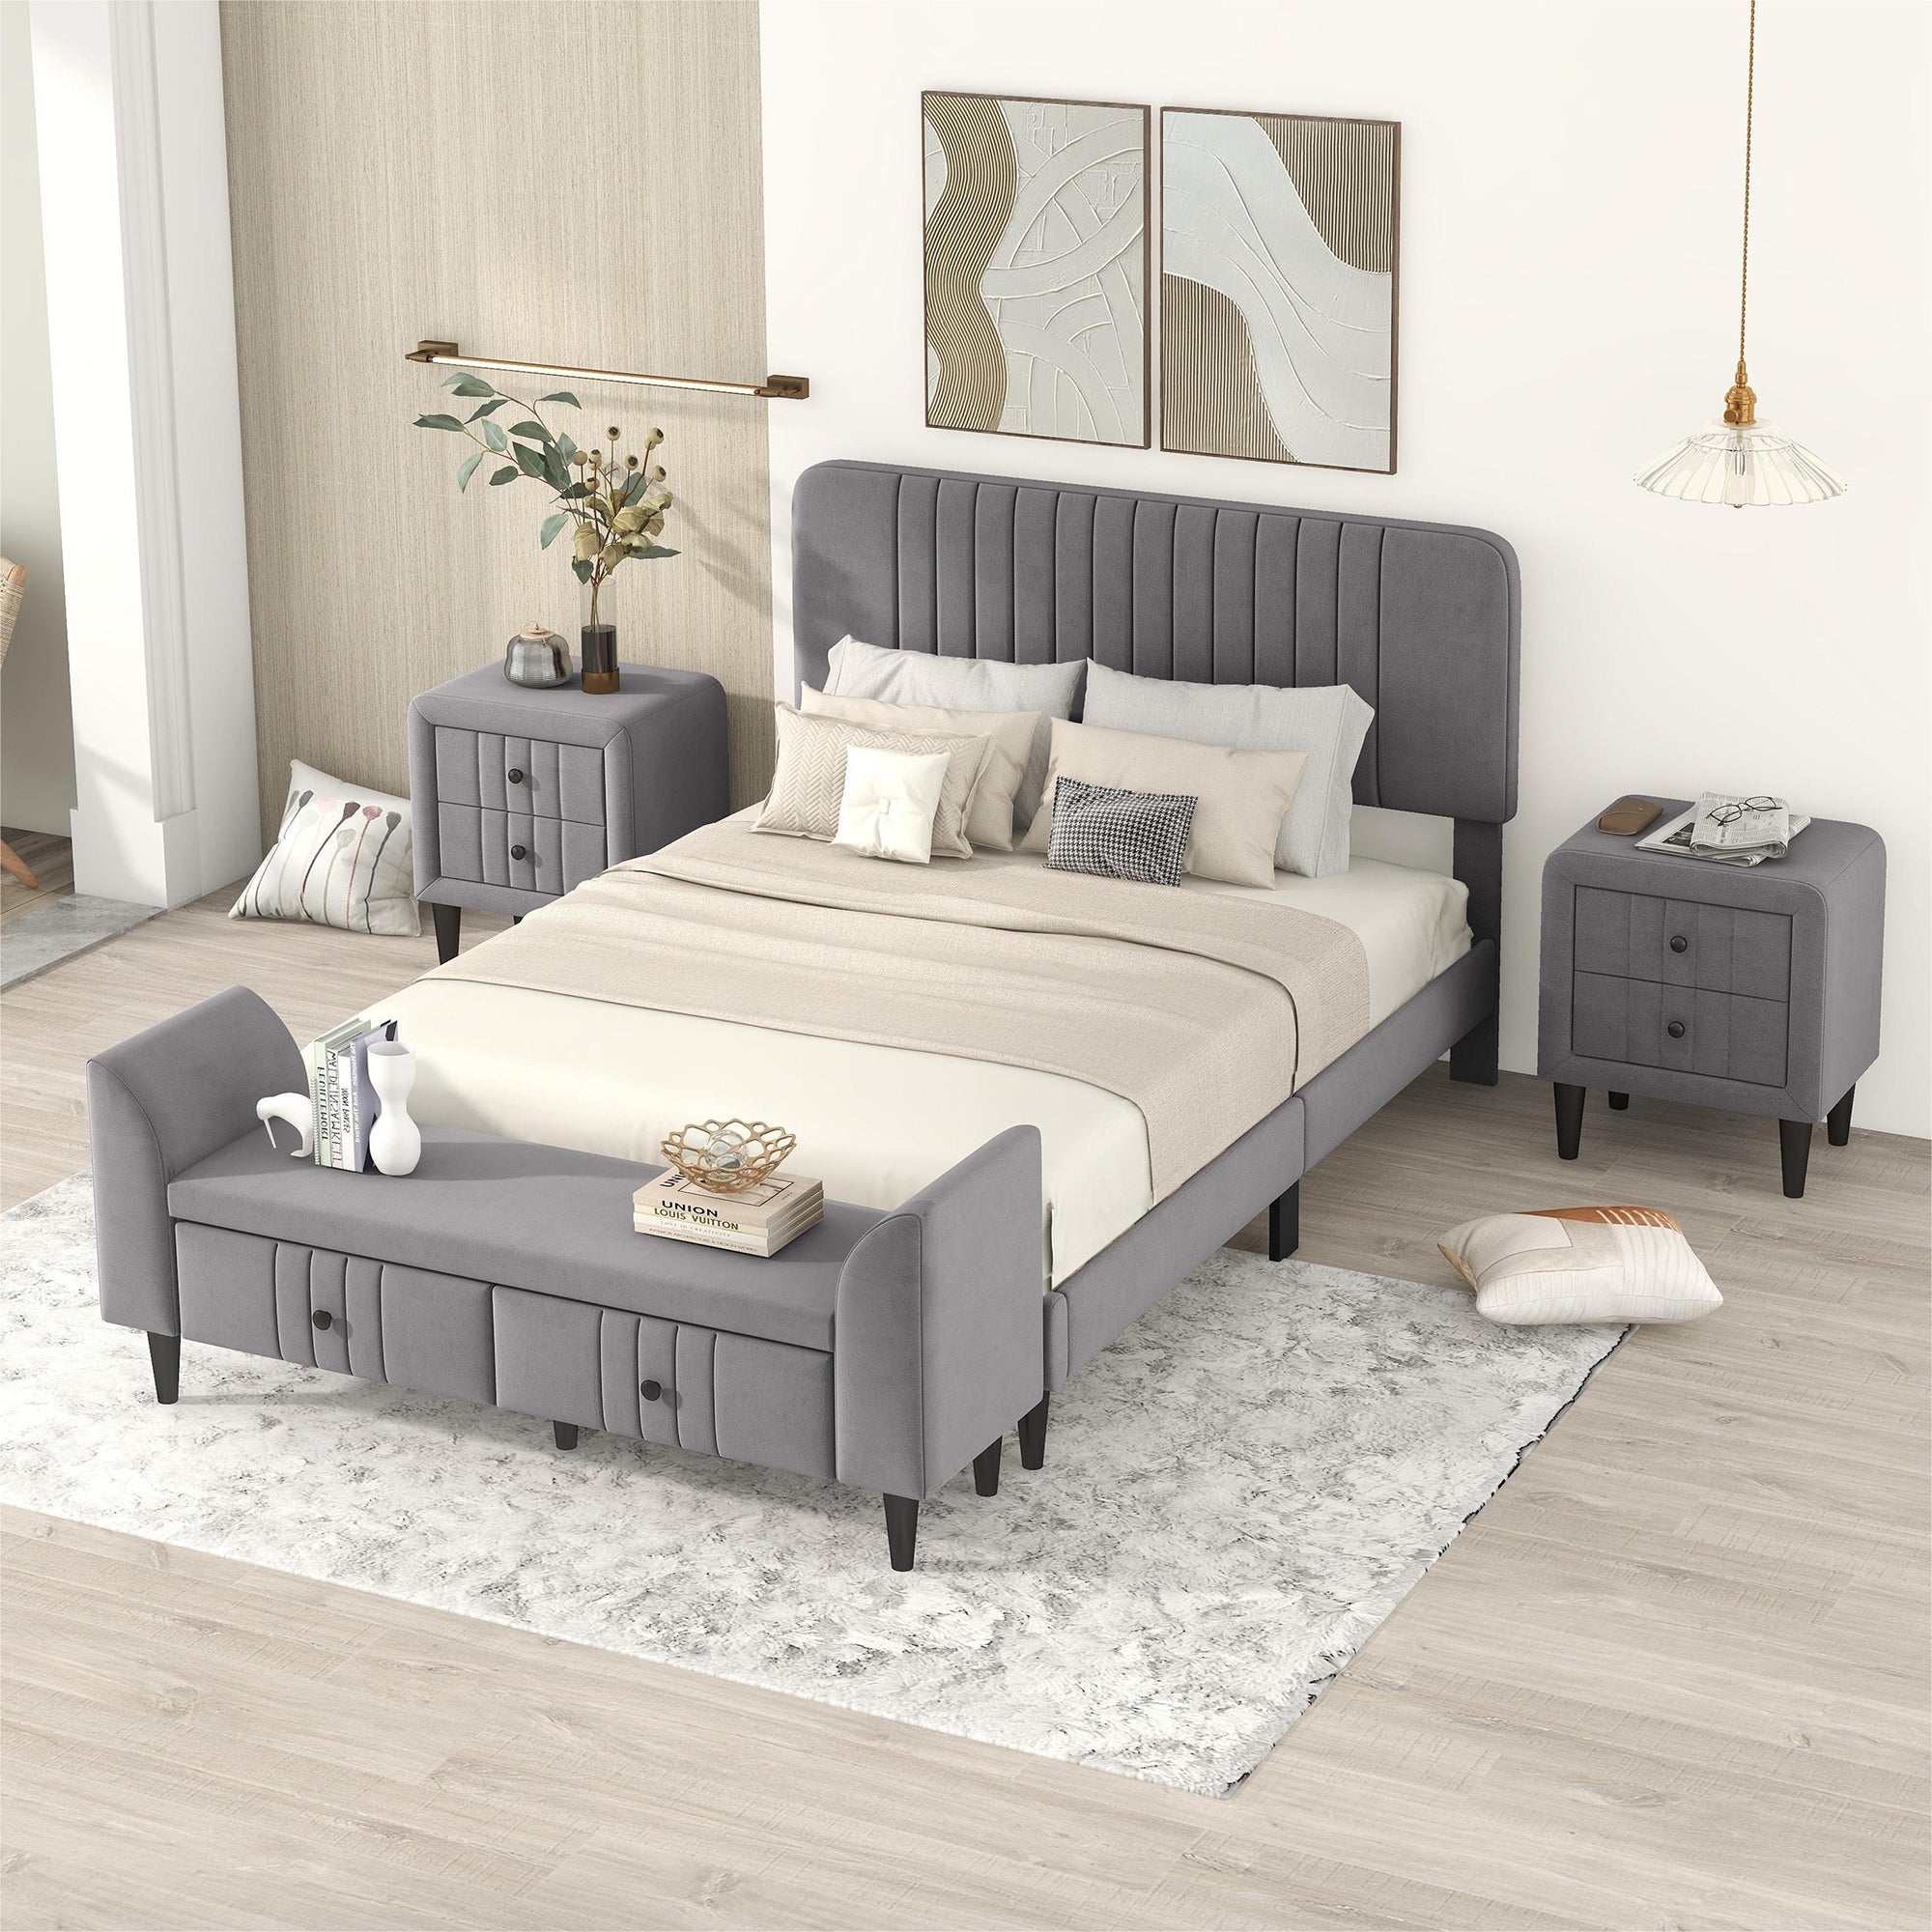 4-Pieces Bedroom Sets Full Size Upholstered Platform Bed with Two Nightstands and Storage Bench-Gray